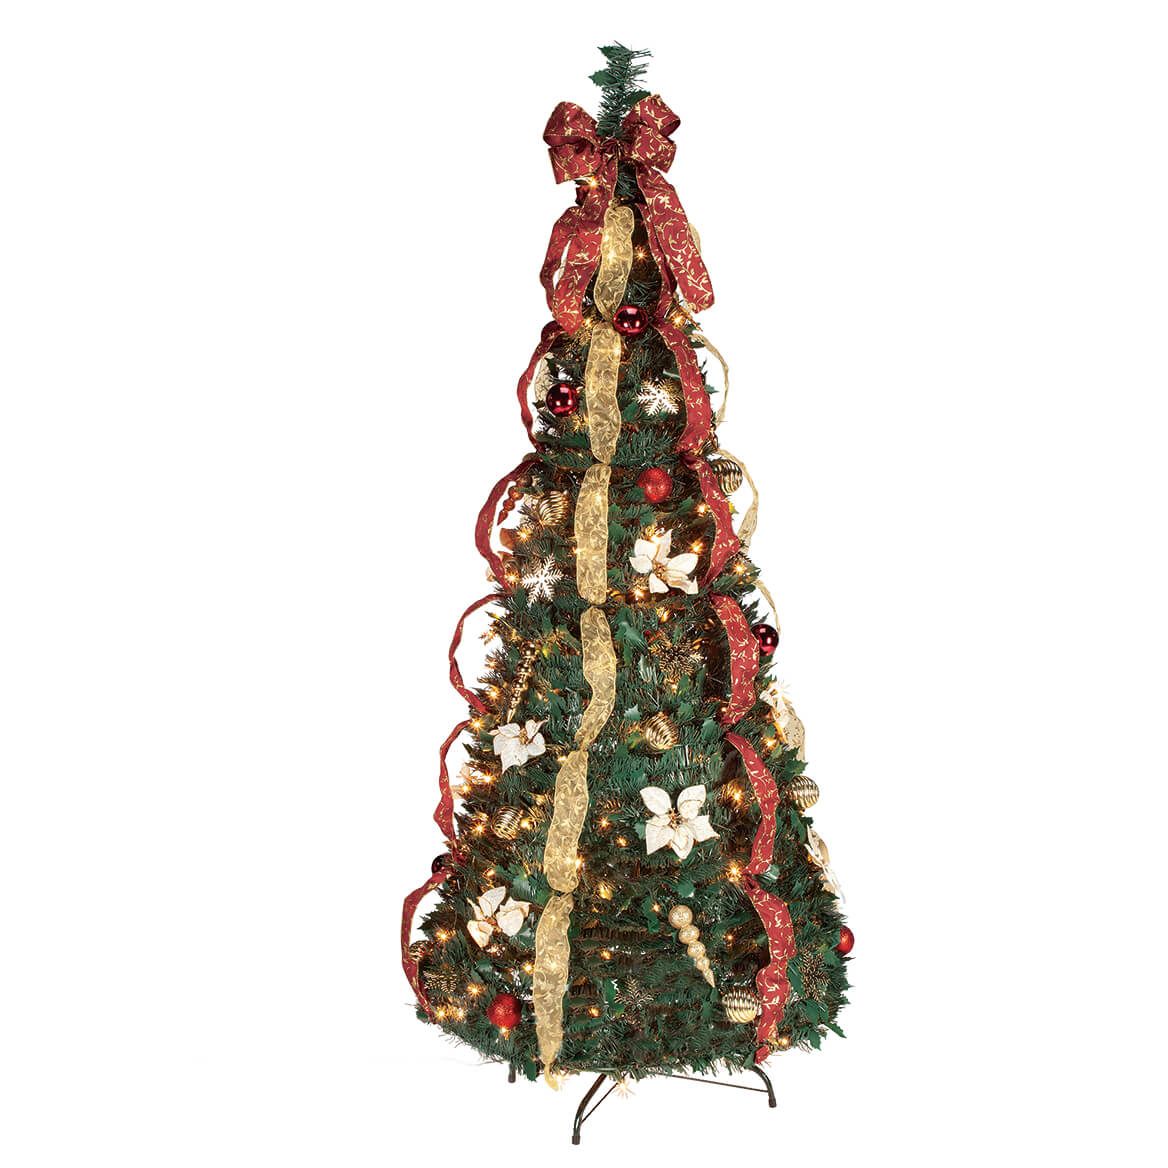 6' Burgundy & Gold Victorian Pull-Up Tree by Holiday Peak™ + '-' + 370813